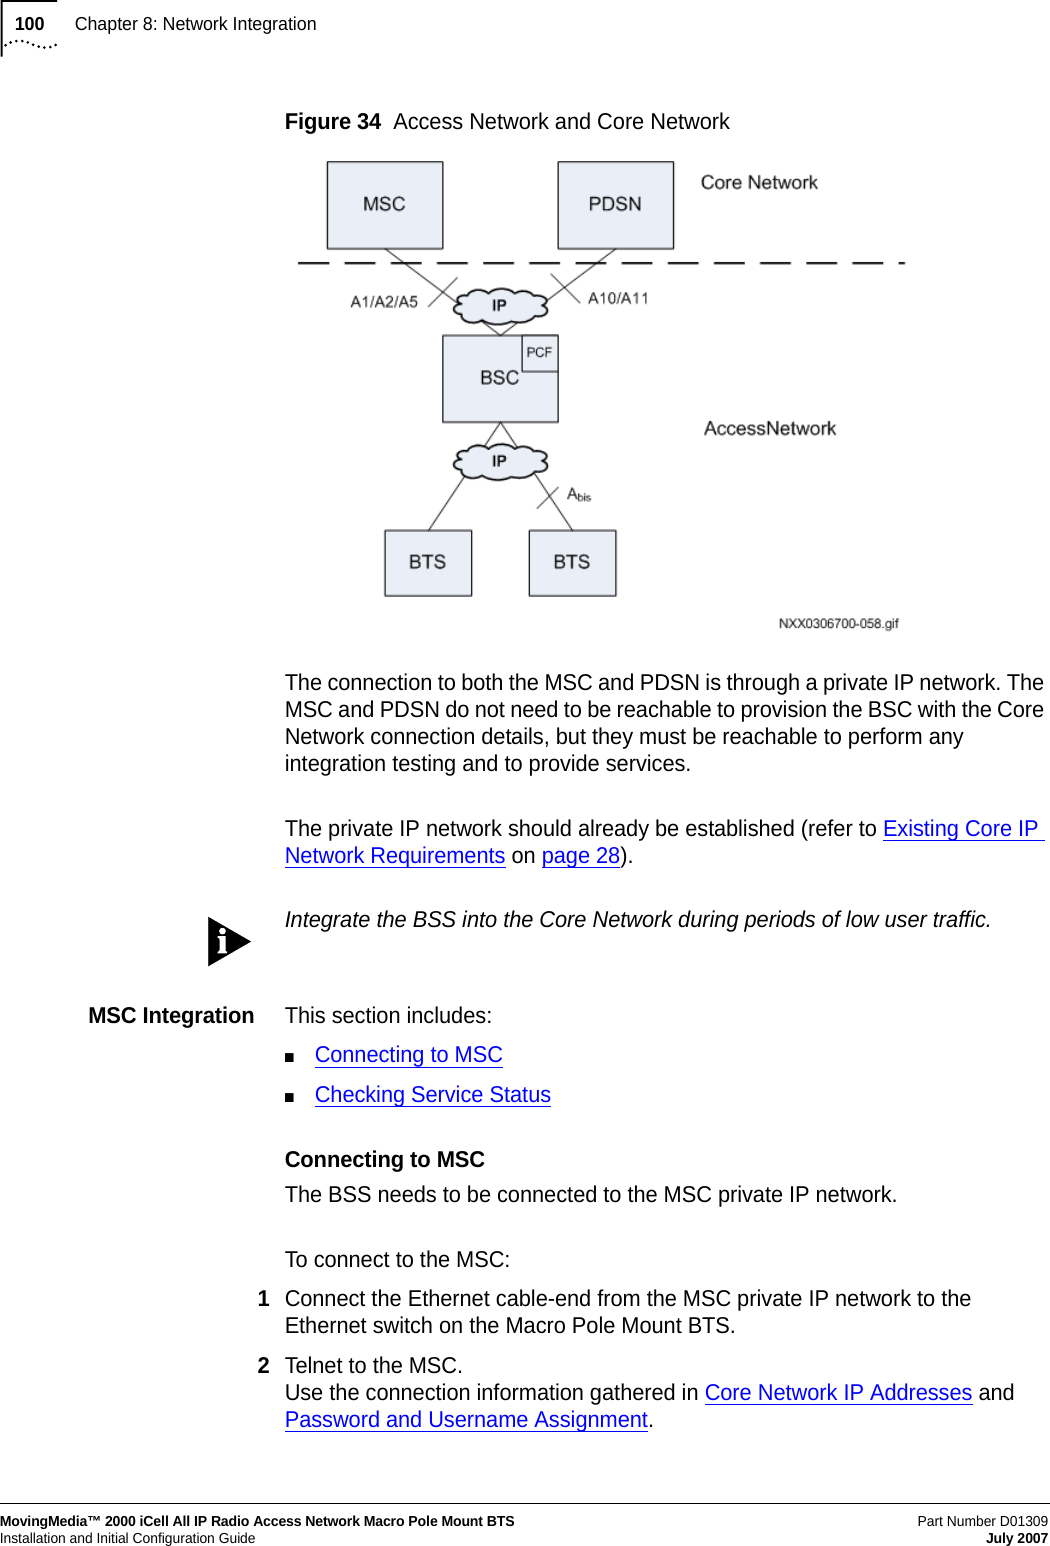 100Chapter 8: Network IntegrationMovingMedia™ 2000 iCell All IP Radio Access Network Macro Pole Mount BTSPart Number D01309 Installation and Initial Configuration Guide July 2007Figure 34  Access Network and Core NetworkThe connection to both the MSC and PDSN is through a private IP network. The MSC and PDSN do not need to be reachable to provision the BSC with the Core Network connection details, but they must be reachable to perform any integration testing and to provide services.The private IP network should already be established (refer to Existing Core IP Network Requirements on page 28).Integrate the BSS into the Core Network during periods of low user traffic.MSC Integration This section includes:■Connecting to MSC■Checking Service StatusConnecting to MSCThe BSS needs to be connected to the MSC private IP network.To connect to the MSC:1Connect the Ethernet cable-end from the MSC private IP network to the Ethernet switch on the Macro Pole Mount BTS.2Telnet to the MSC. Use the connection information gathered in Core Network IP Addresses and Password and Username Assignment.